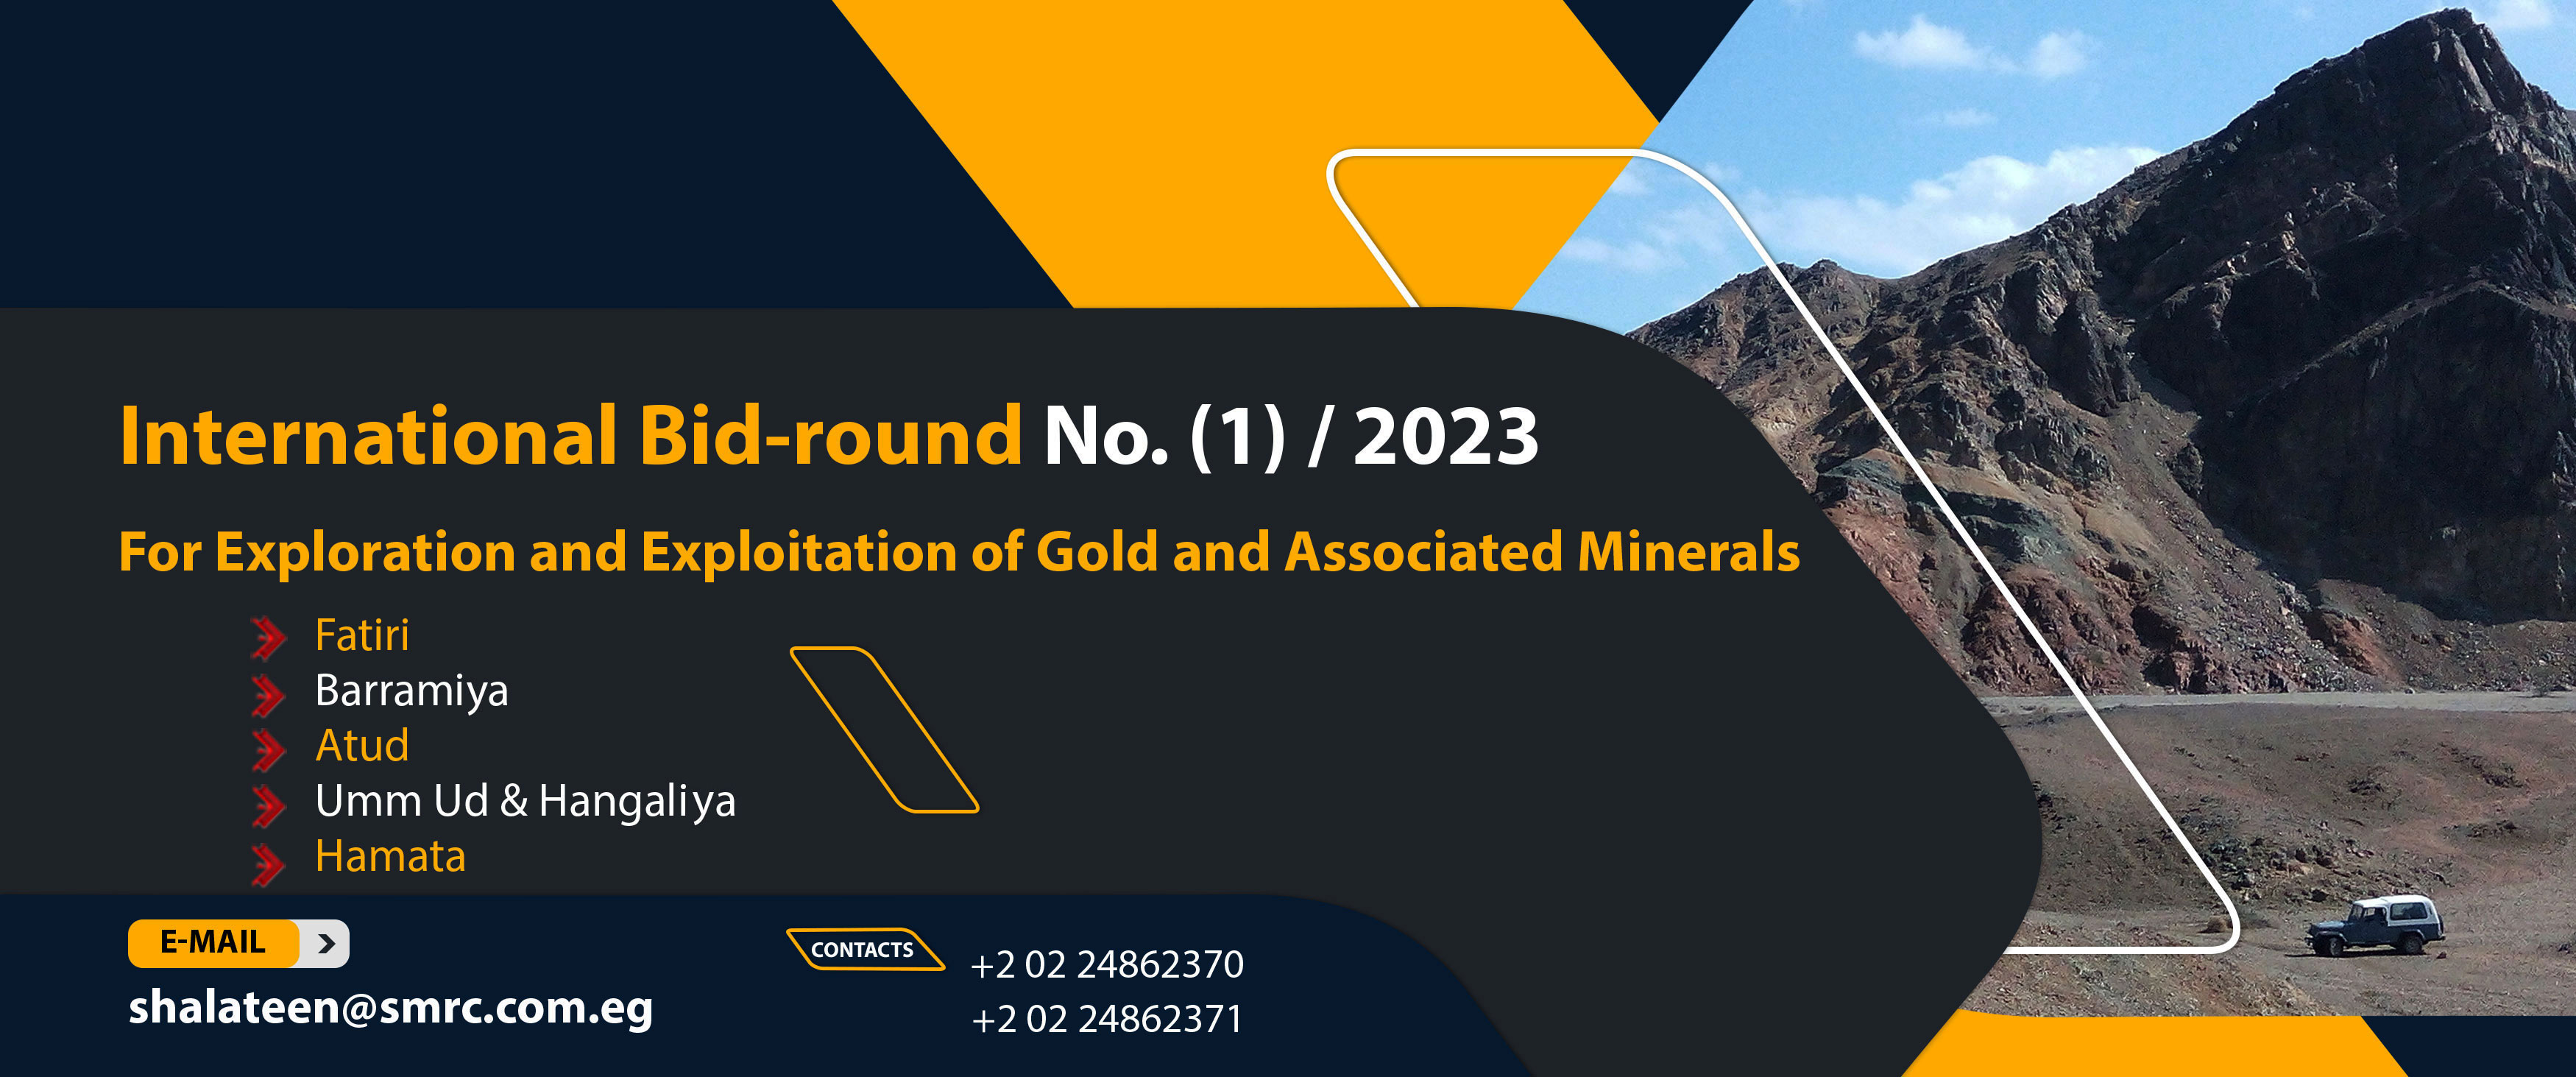 SMRC announces the Bid round No. (1) / 2023 for exploration and exploitation of gold and associated minerals